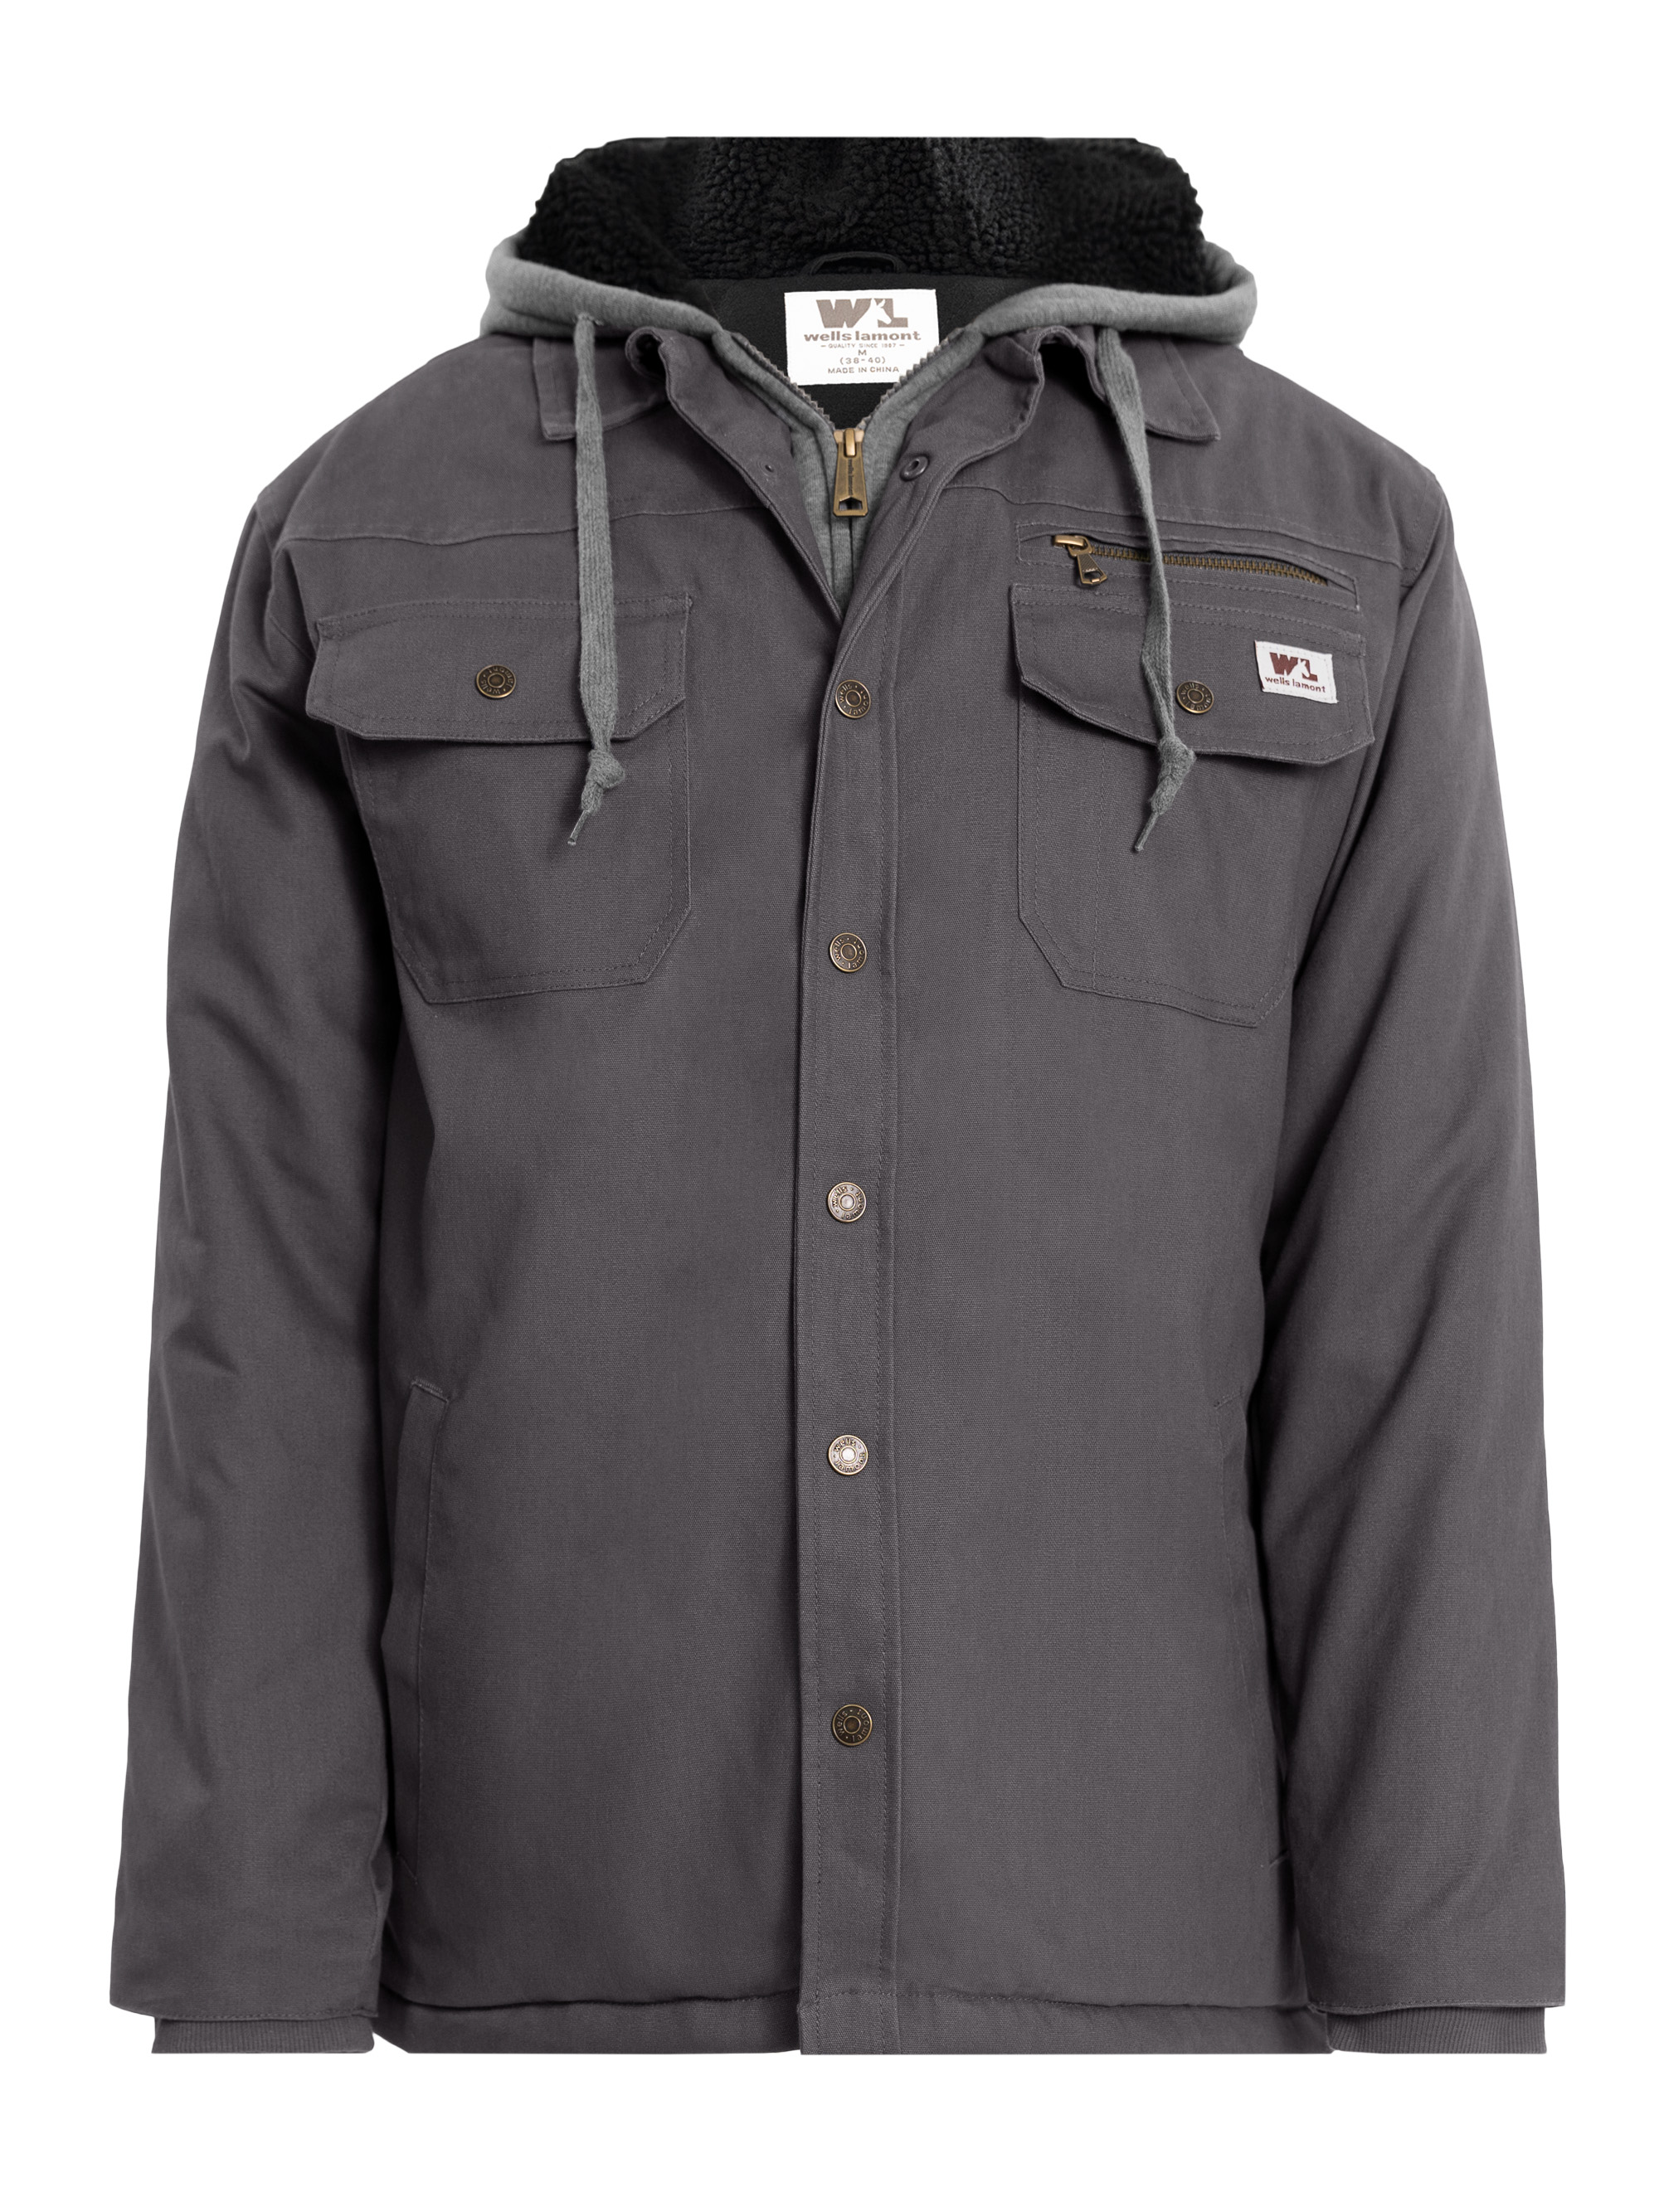 Wells Lamont Quilted Flex Canvas Thermal Sherpa Lined Shirt Jacket ...